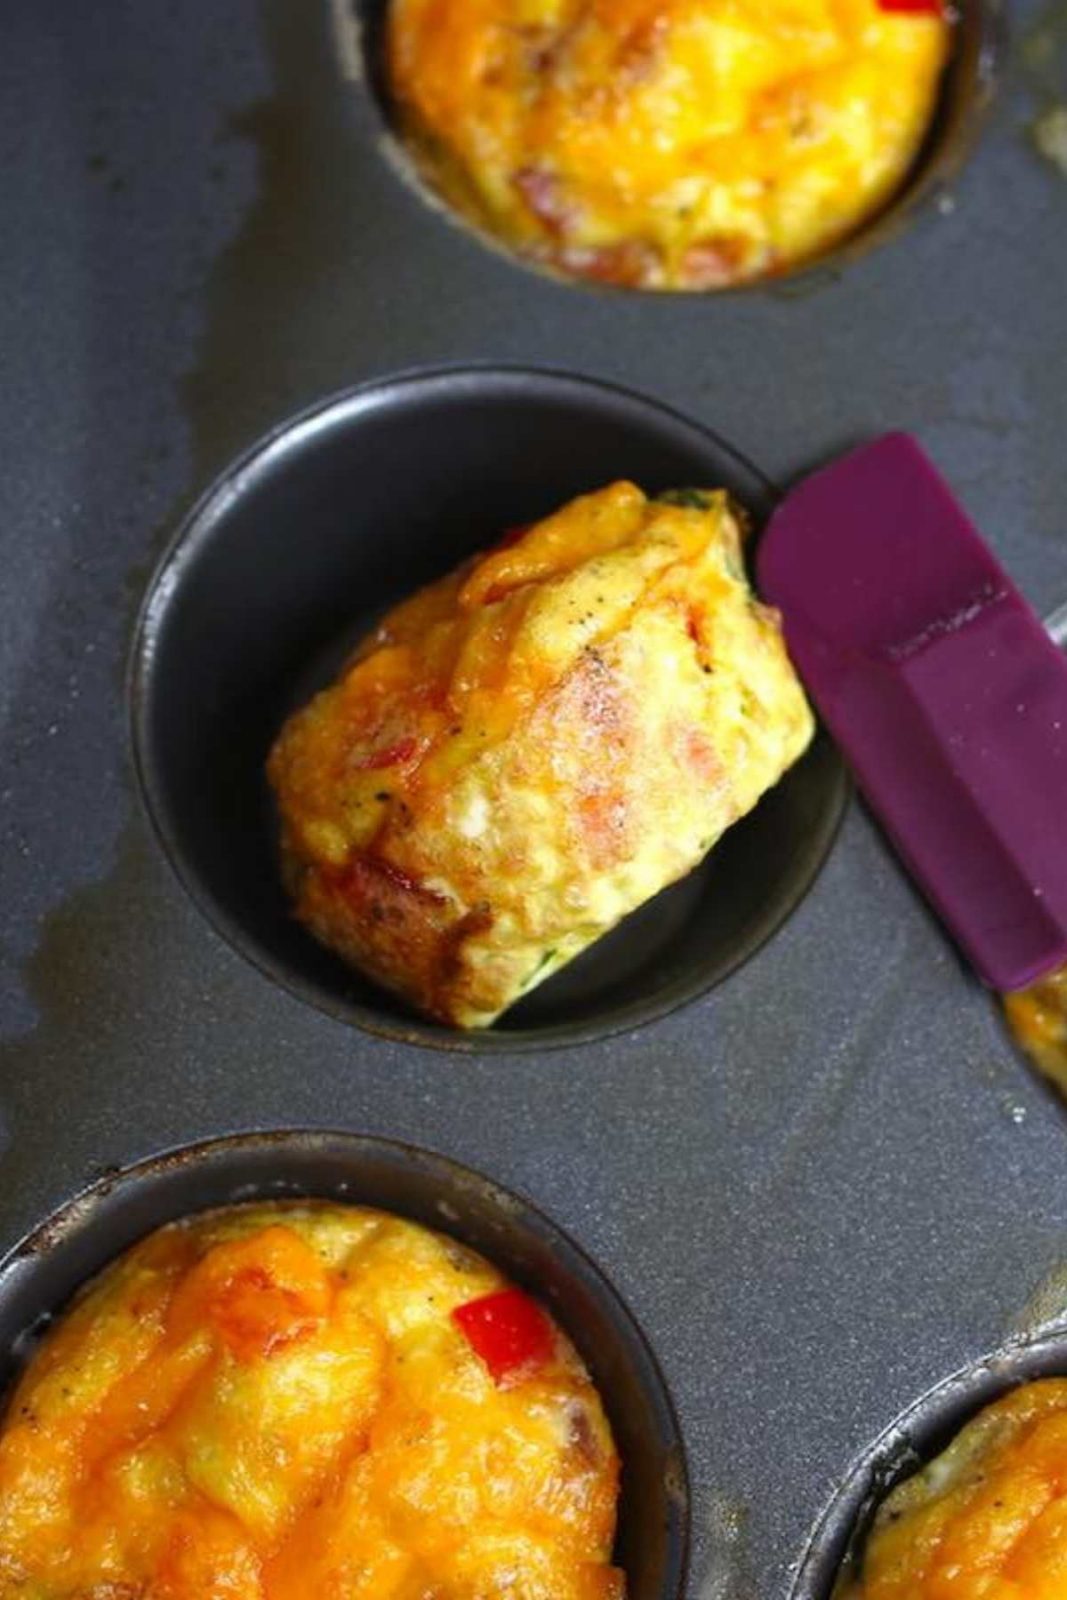 Potluck Breakfast Egg Muffins are an easy make-ahead recipe that takes a few minutes to throw together. These breakfast muffins are delicious, healthy and nutritious, perfect for busy mornings!